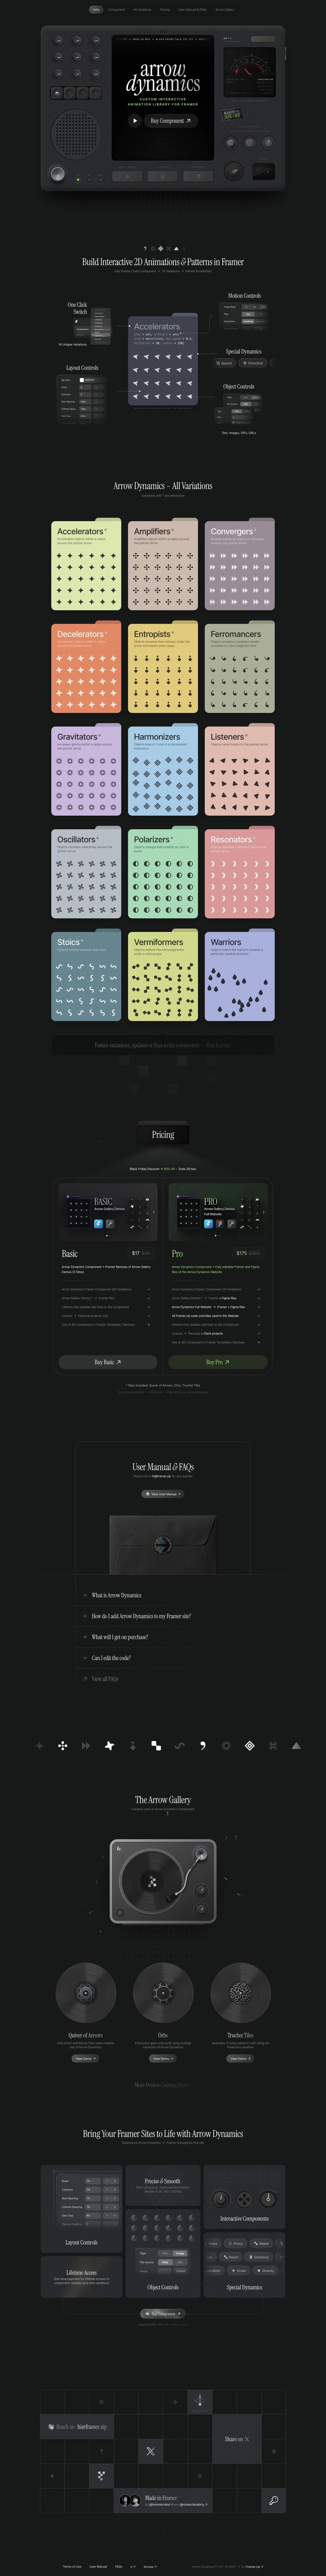 Arrow Dynamics Landing Page Example: Build Interactive 2D Animations and Patterns in Framer. A code component library created using p5.js for seamless and precise pointer interactions and effects to bring your Framer websites alive.